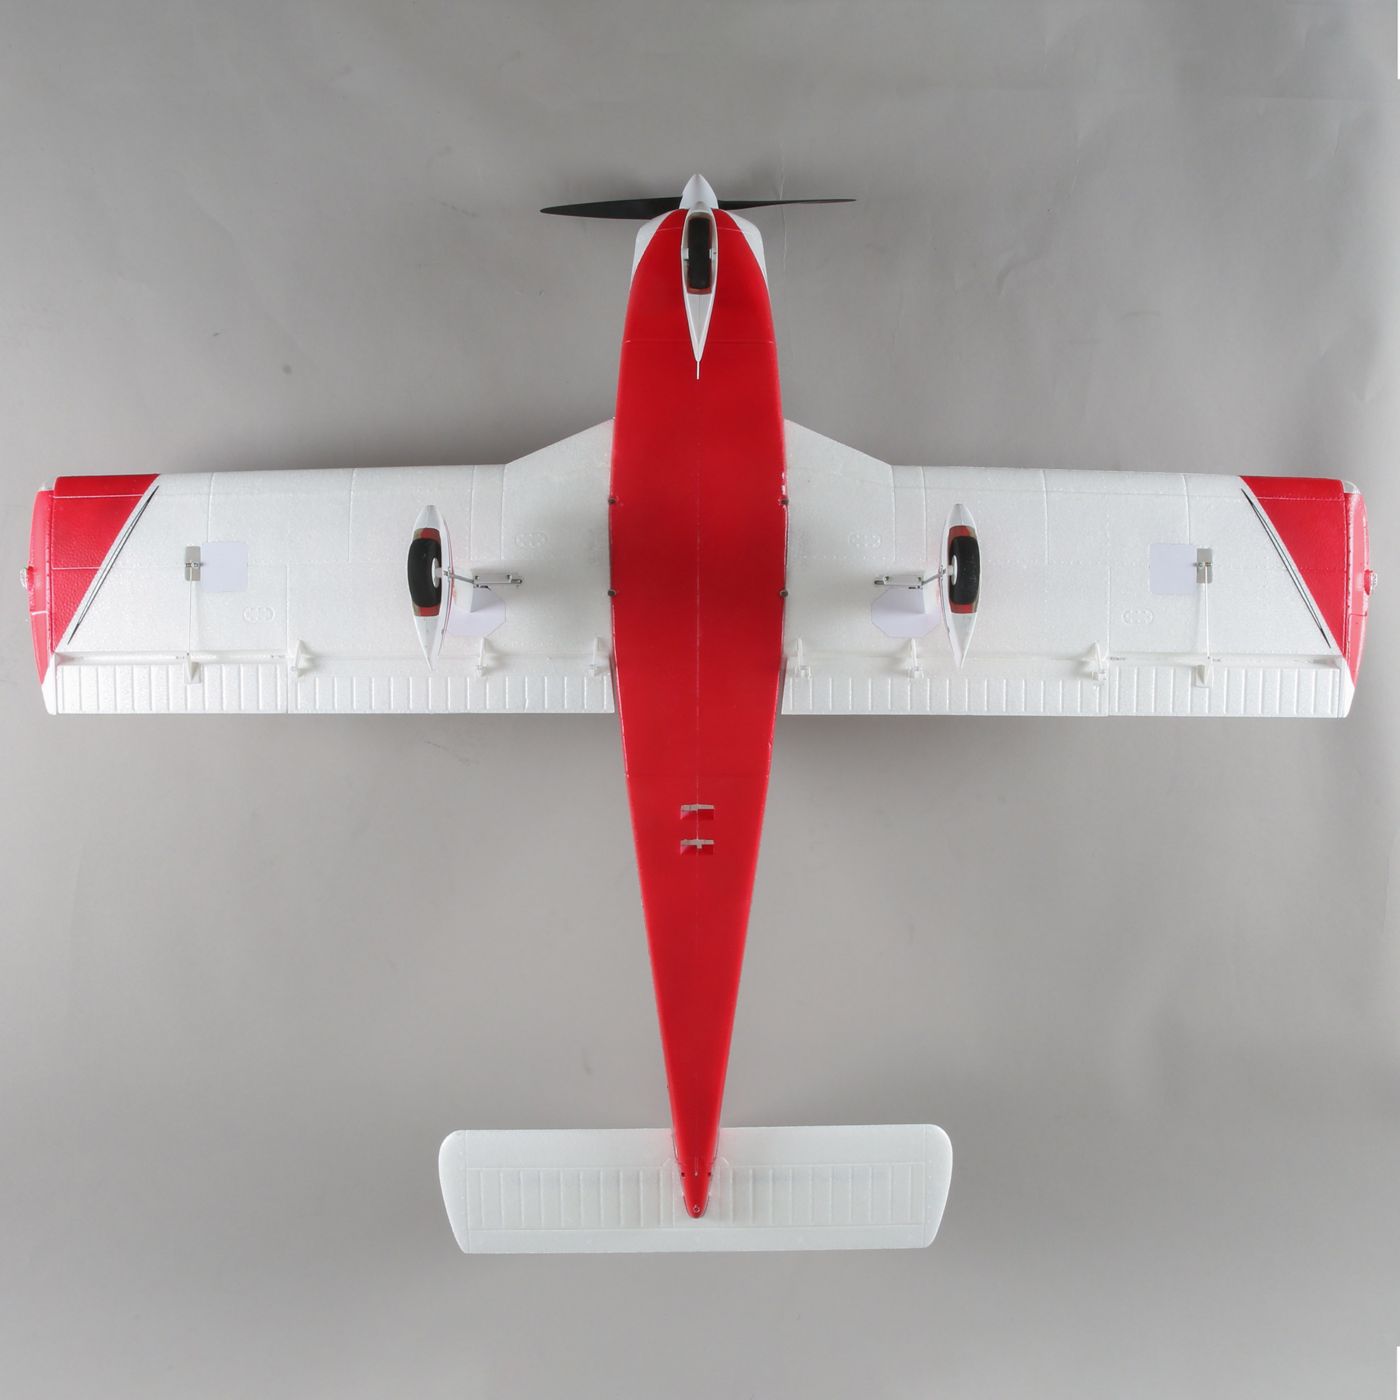 E-Flite Cherokee 1.3m BNF Basic with AS3X and SAFE Select EFL54500